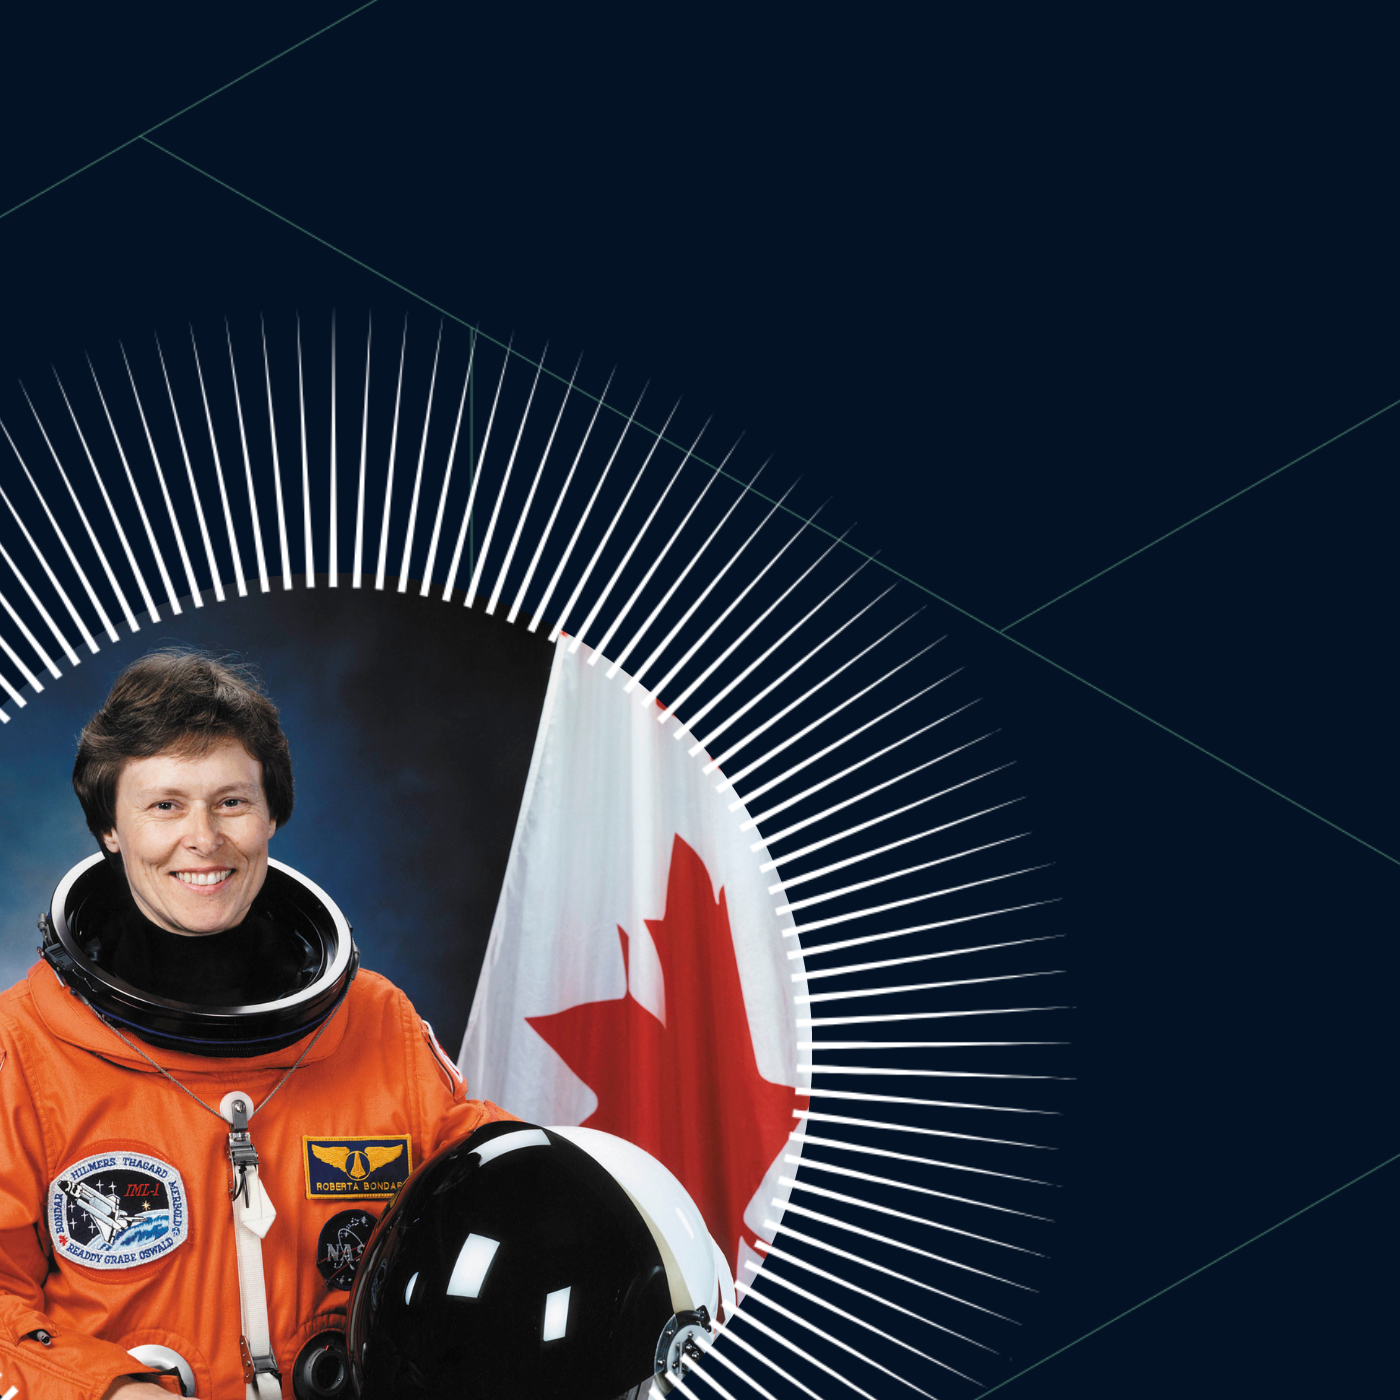 Dr. Bondar in her flight suit surrounded by decorative rays